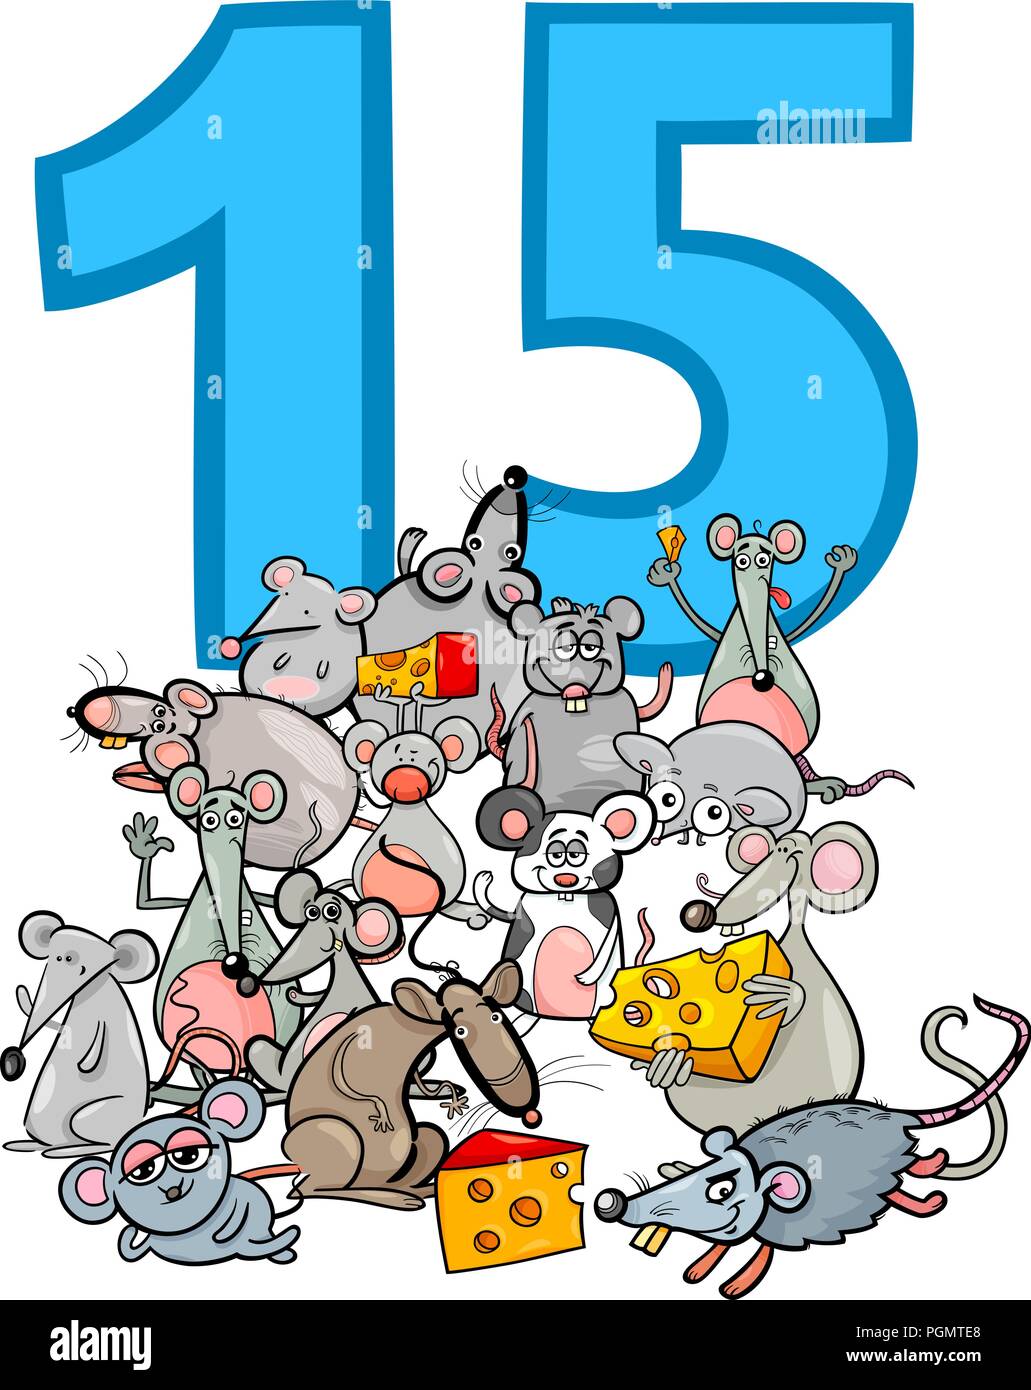 Cartoon Illustration of Number Fifteen and Mice Characters Group Stock Vector